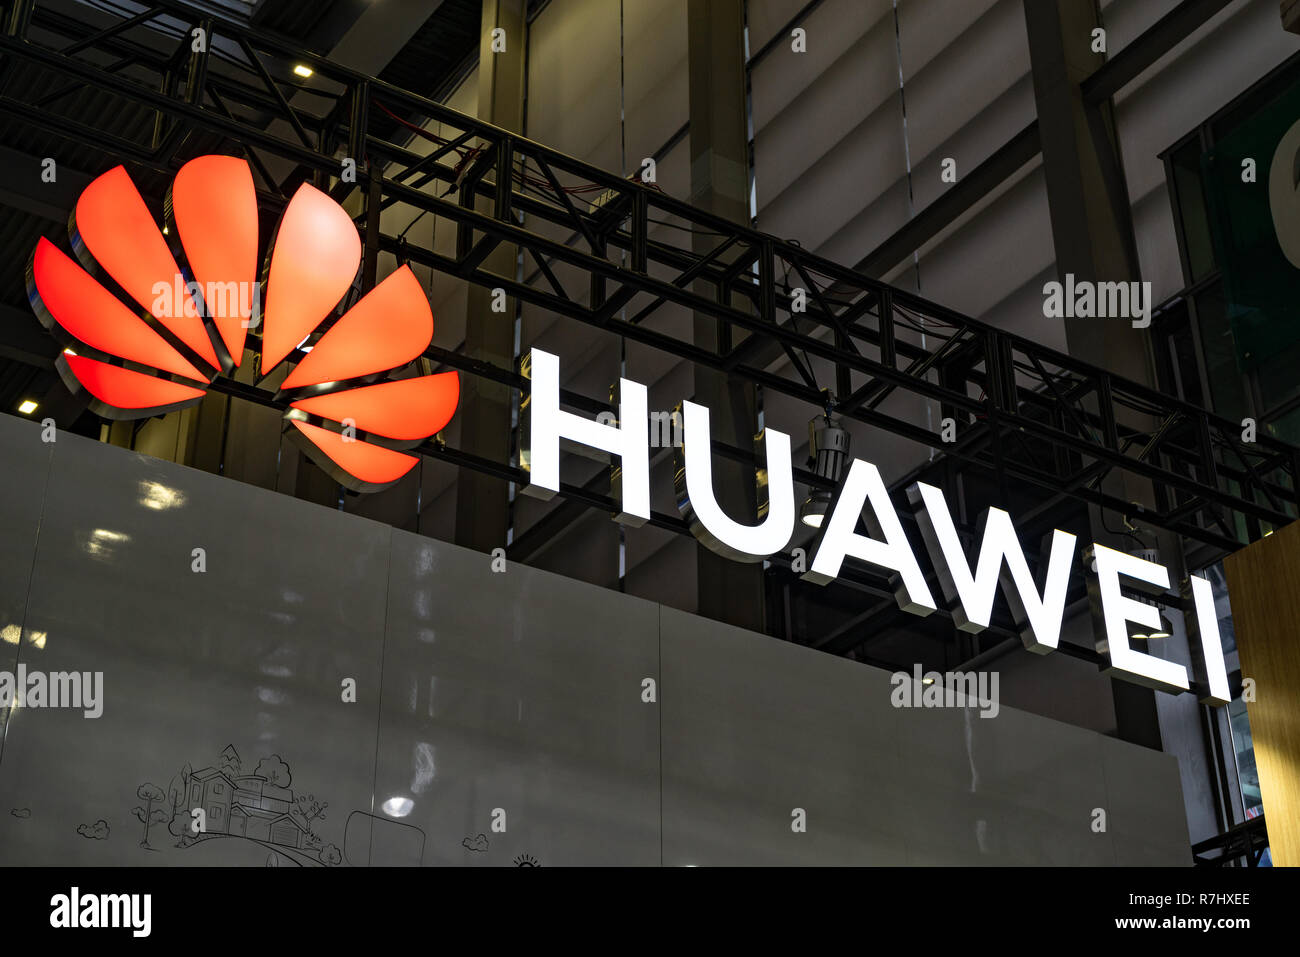 Huawei logo and name seen on an exhibition booth in Shenzhen, China Stock Photo